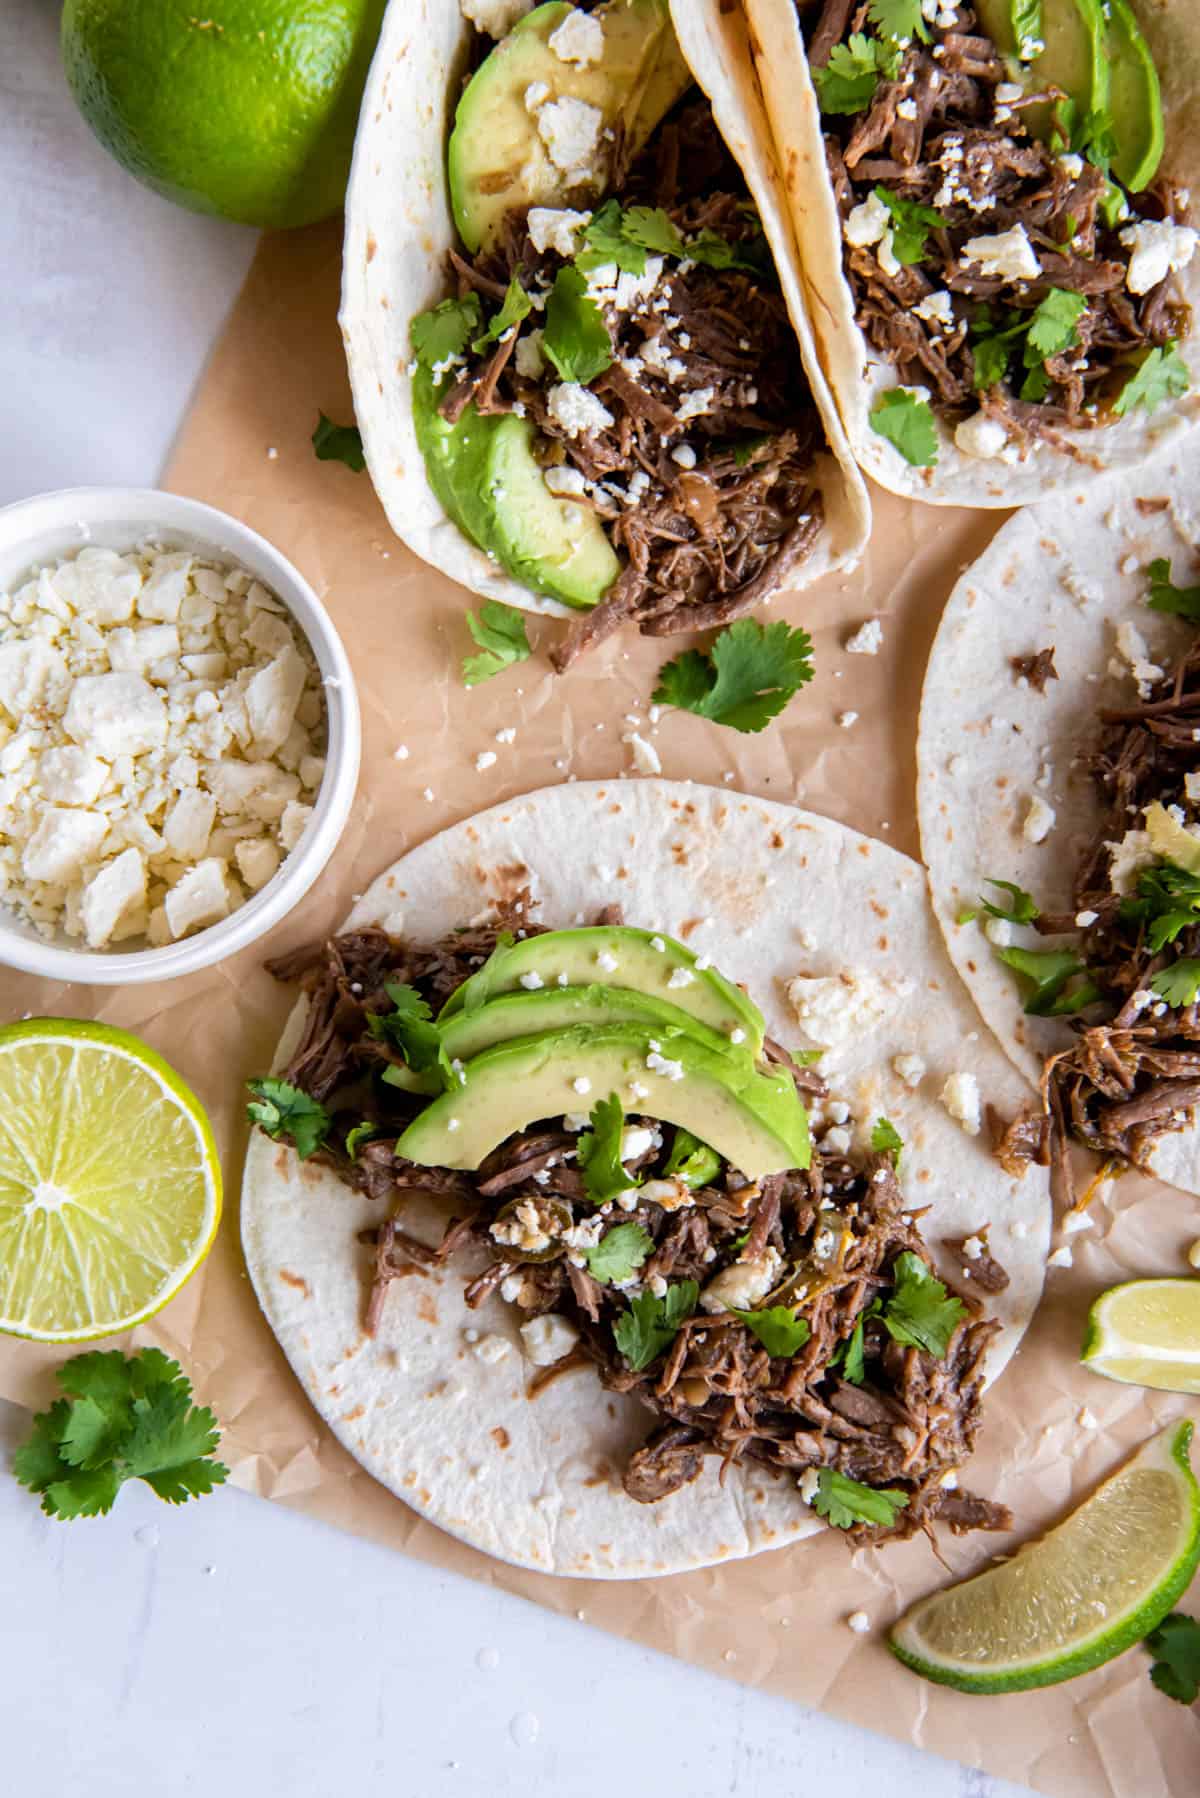 shredded beef served on tortillas and topped with avocados and cheese